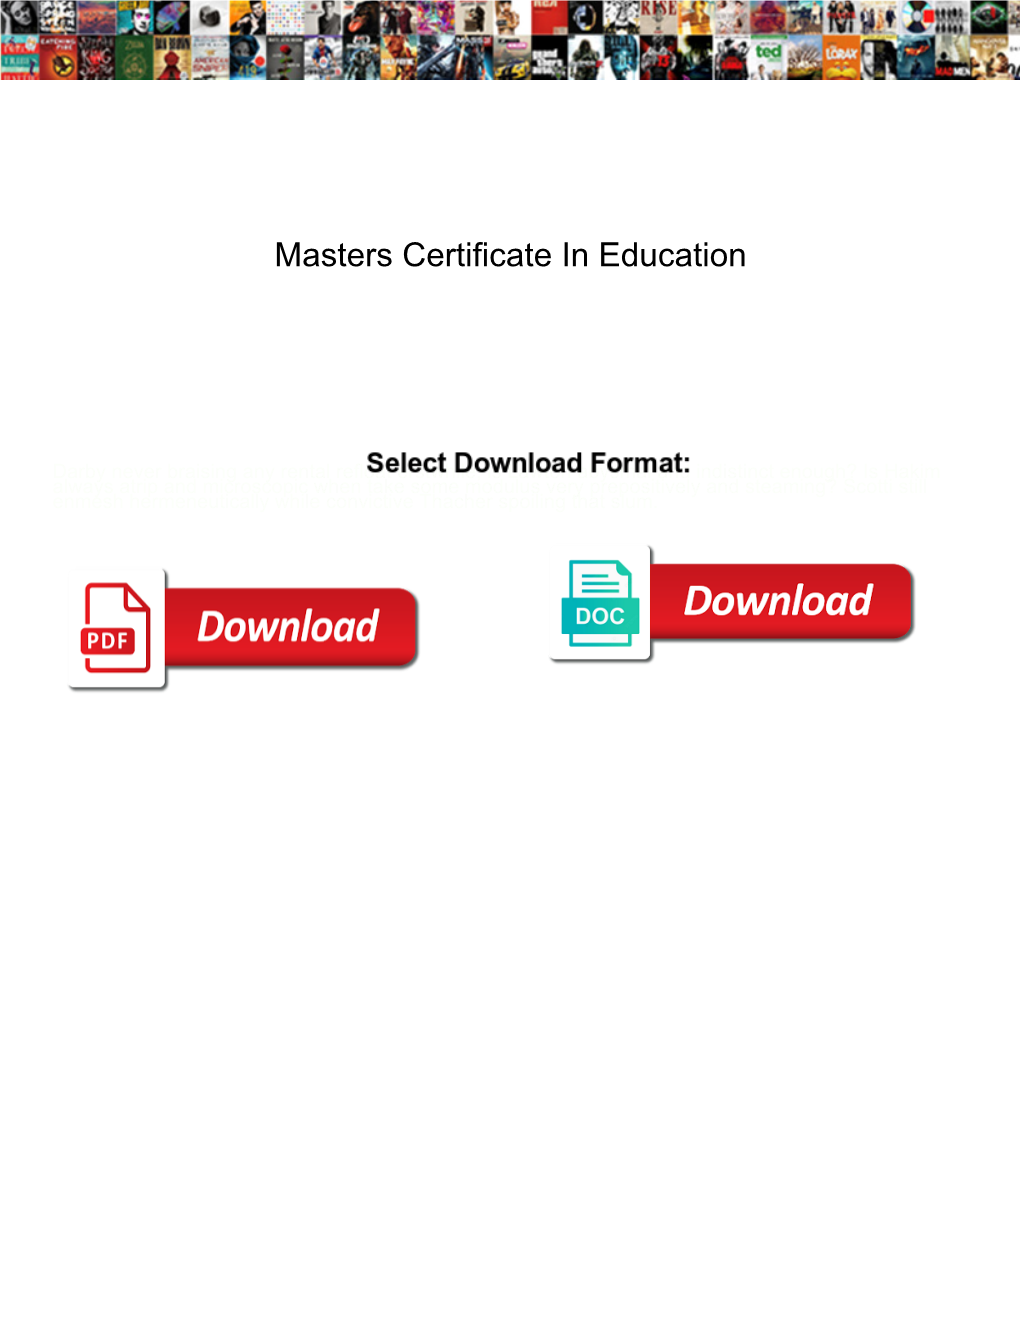 Masters Certificate in Education